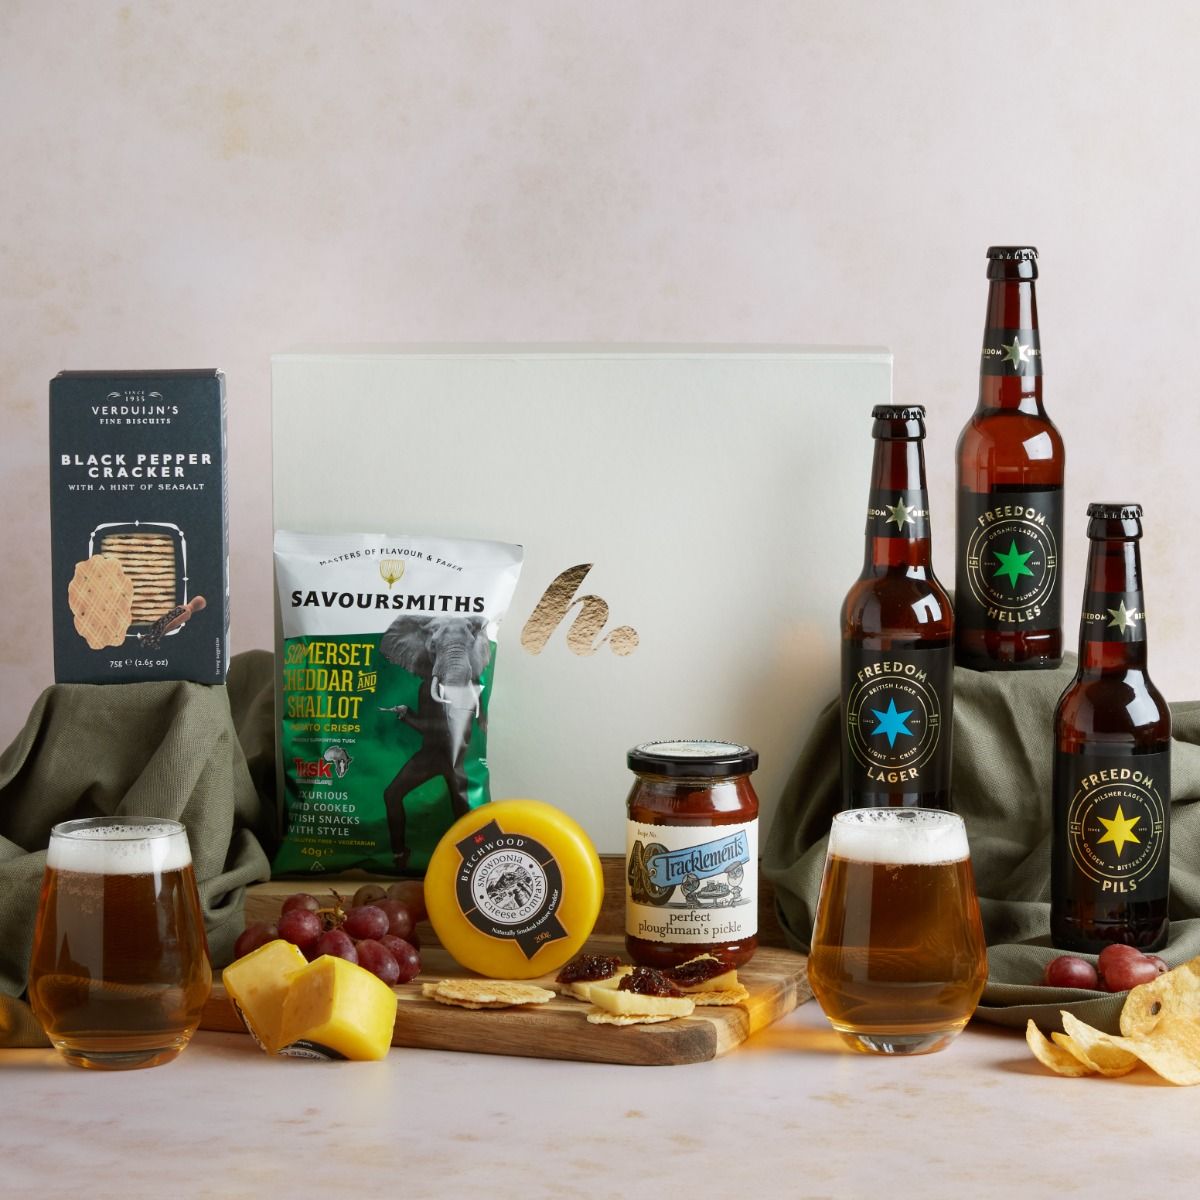 Father's Day Beer & Treats Hamper with contents on display, including exclusive 'Happy Father's Day' chocolate bar